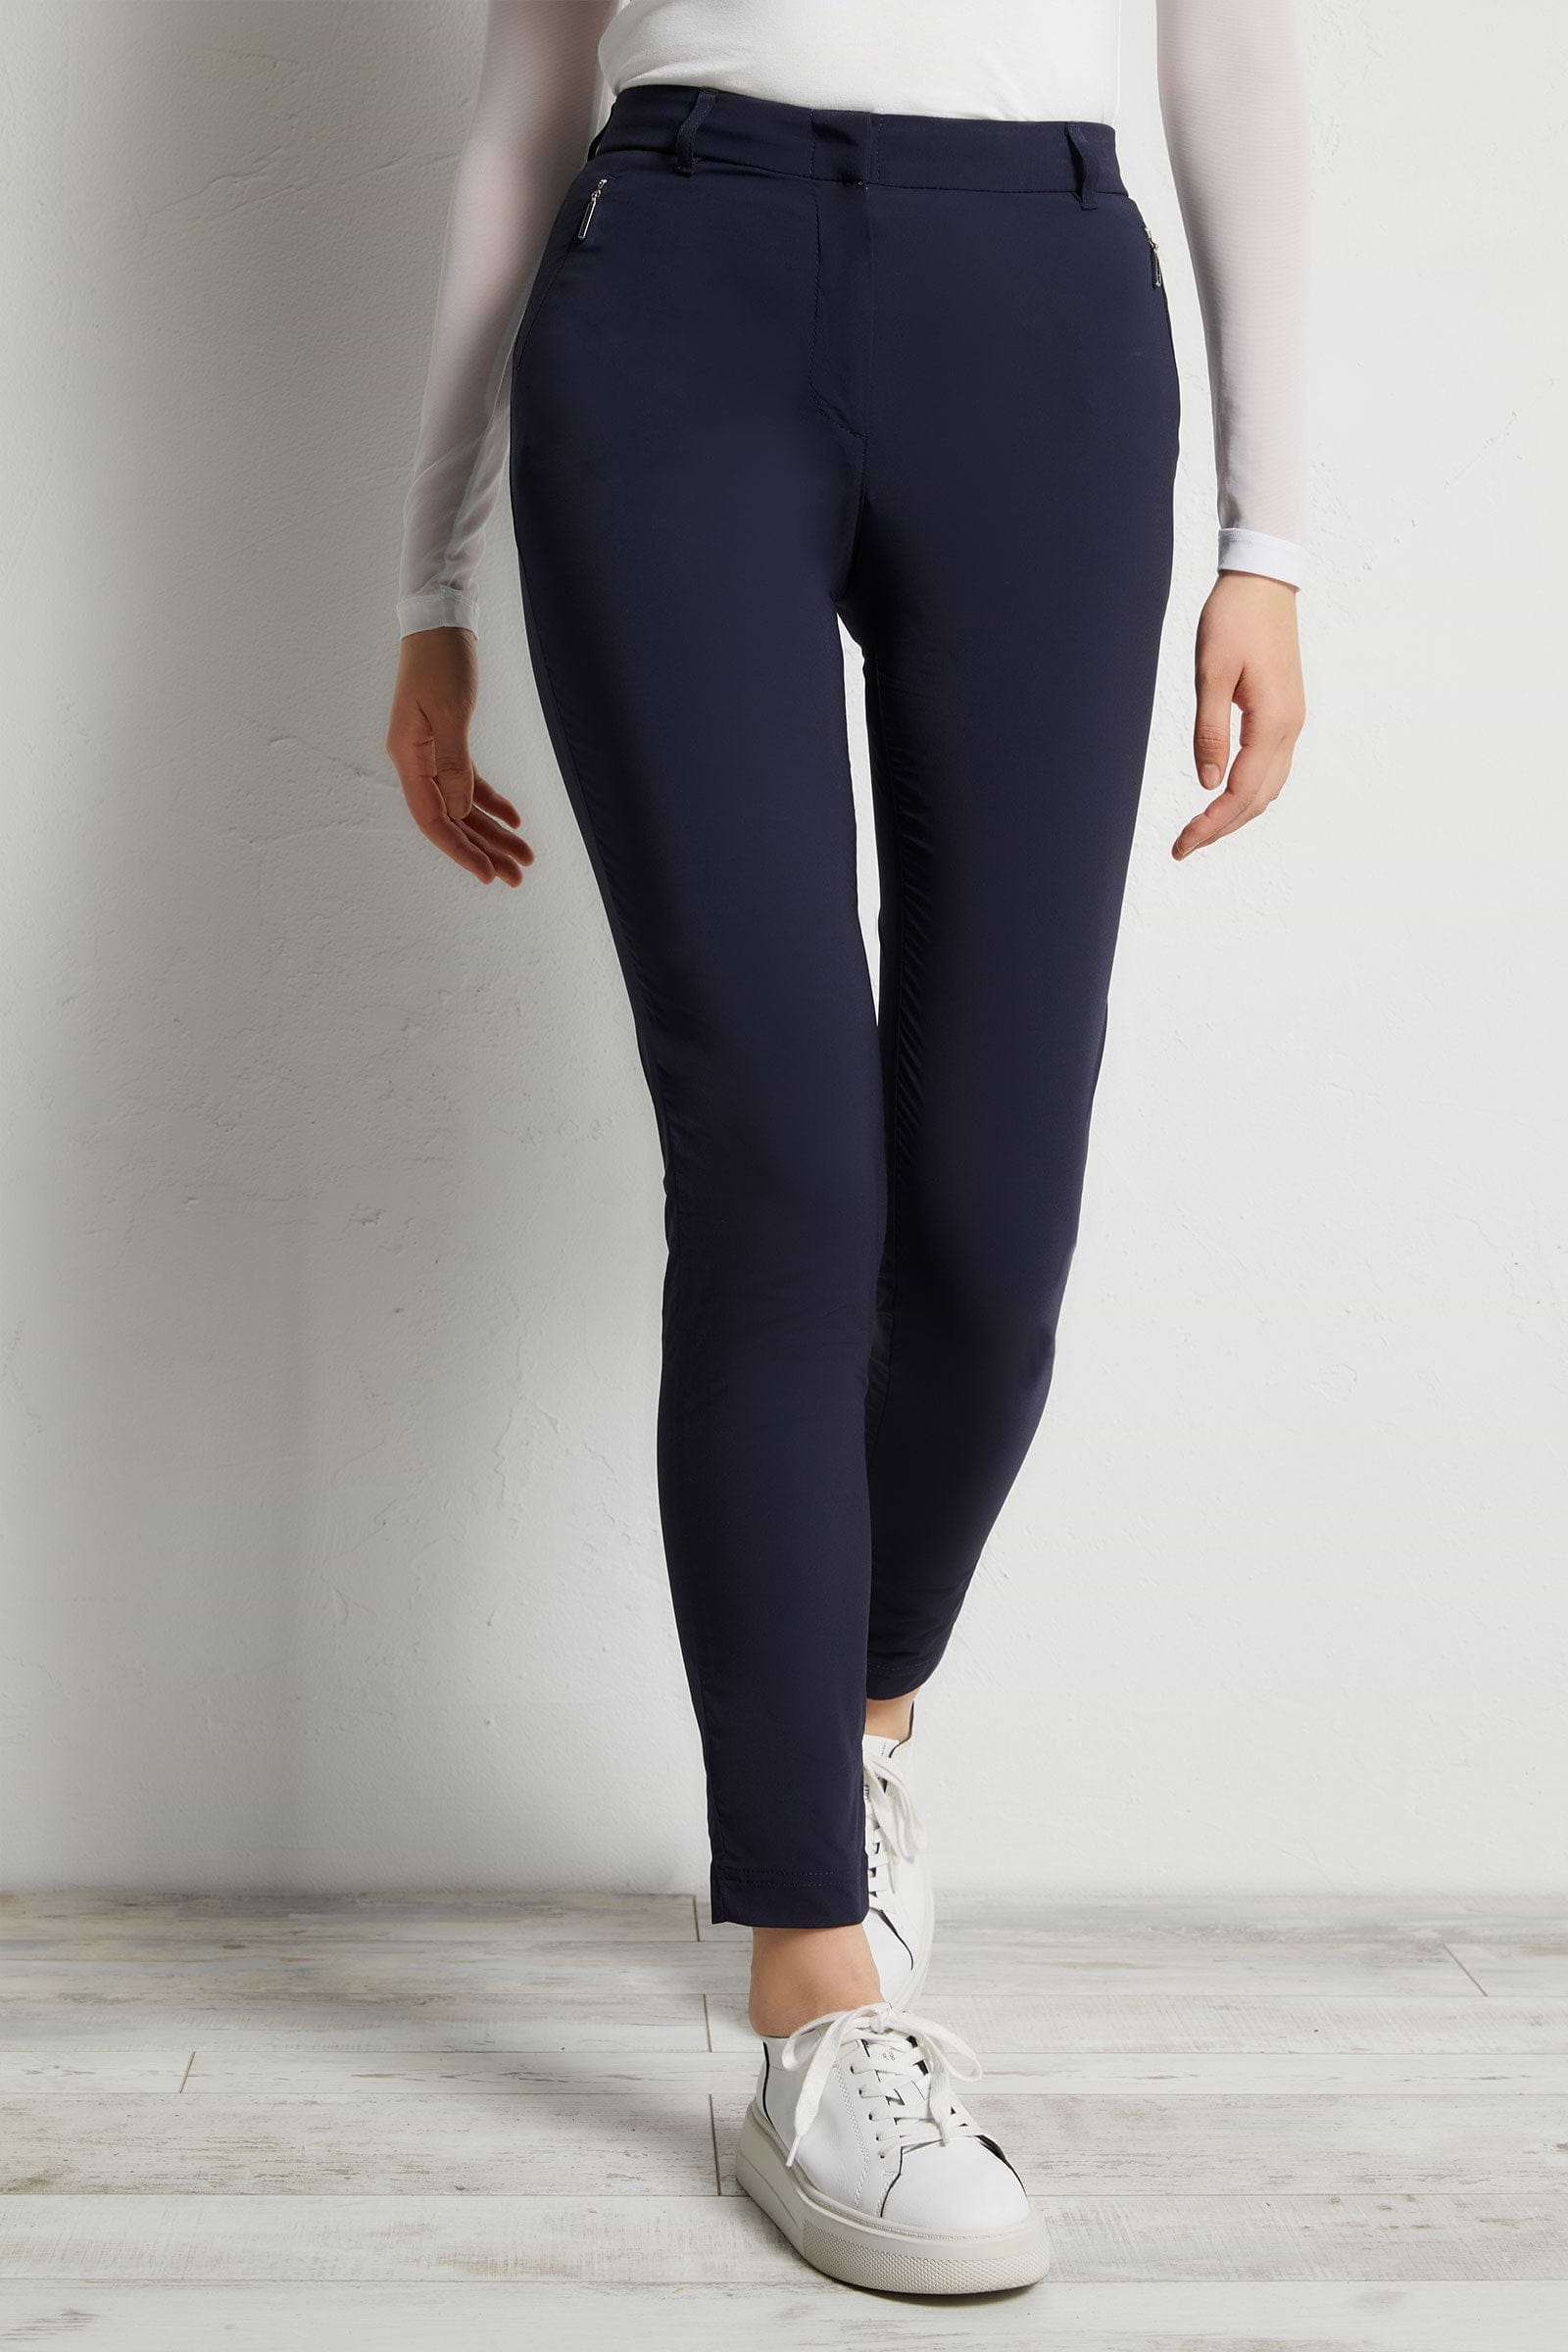 The Best Travel Pants. Front Profile of the Thea Curvy Pant in Navy.